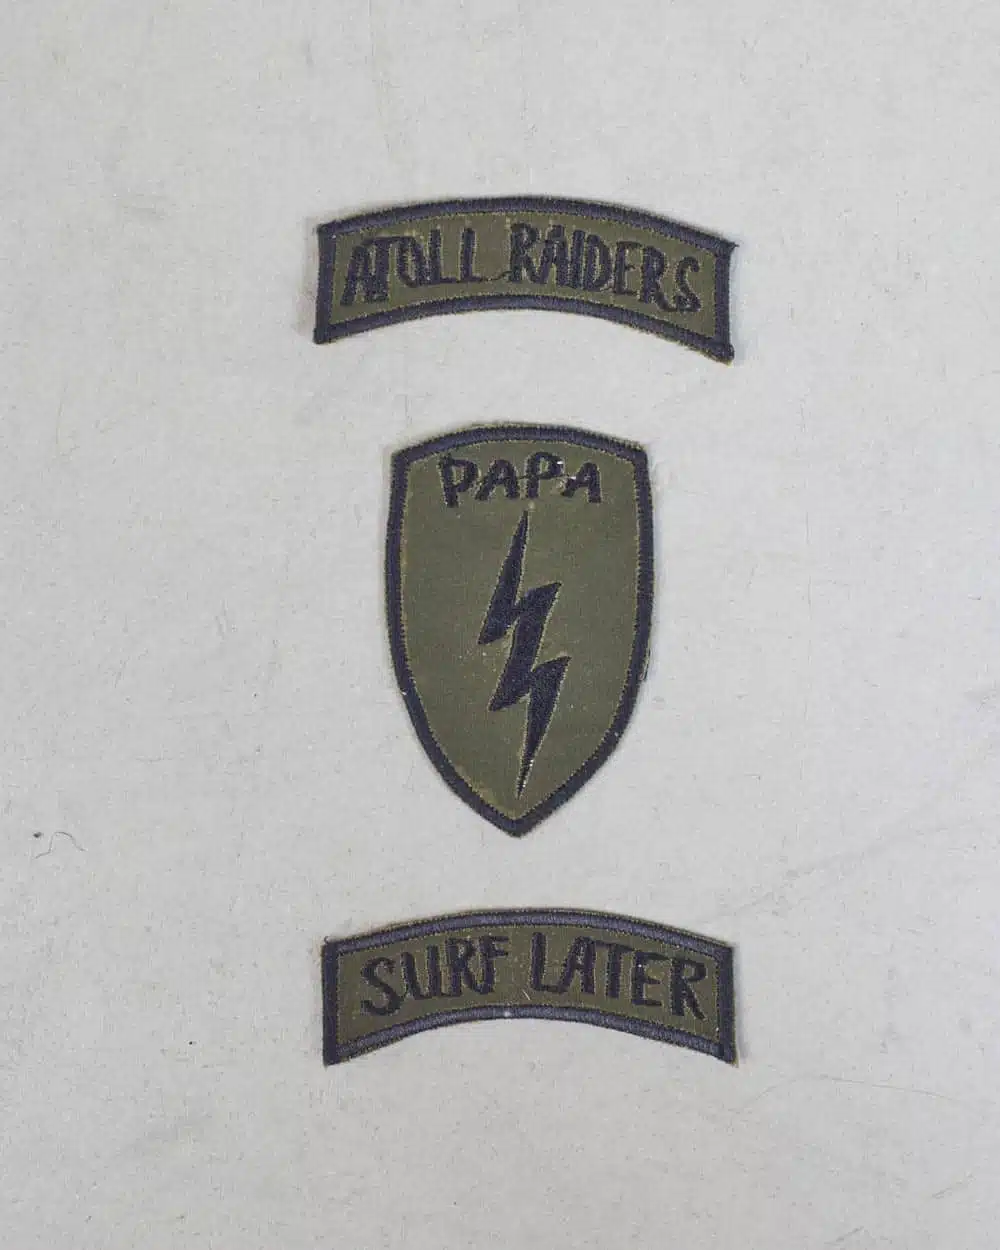 Papa Nui Atoll Raiders Surf Later Patch Set